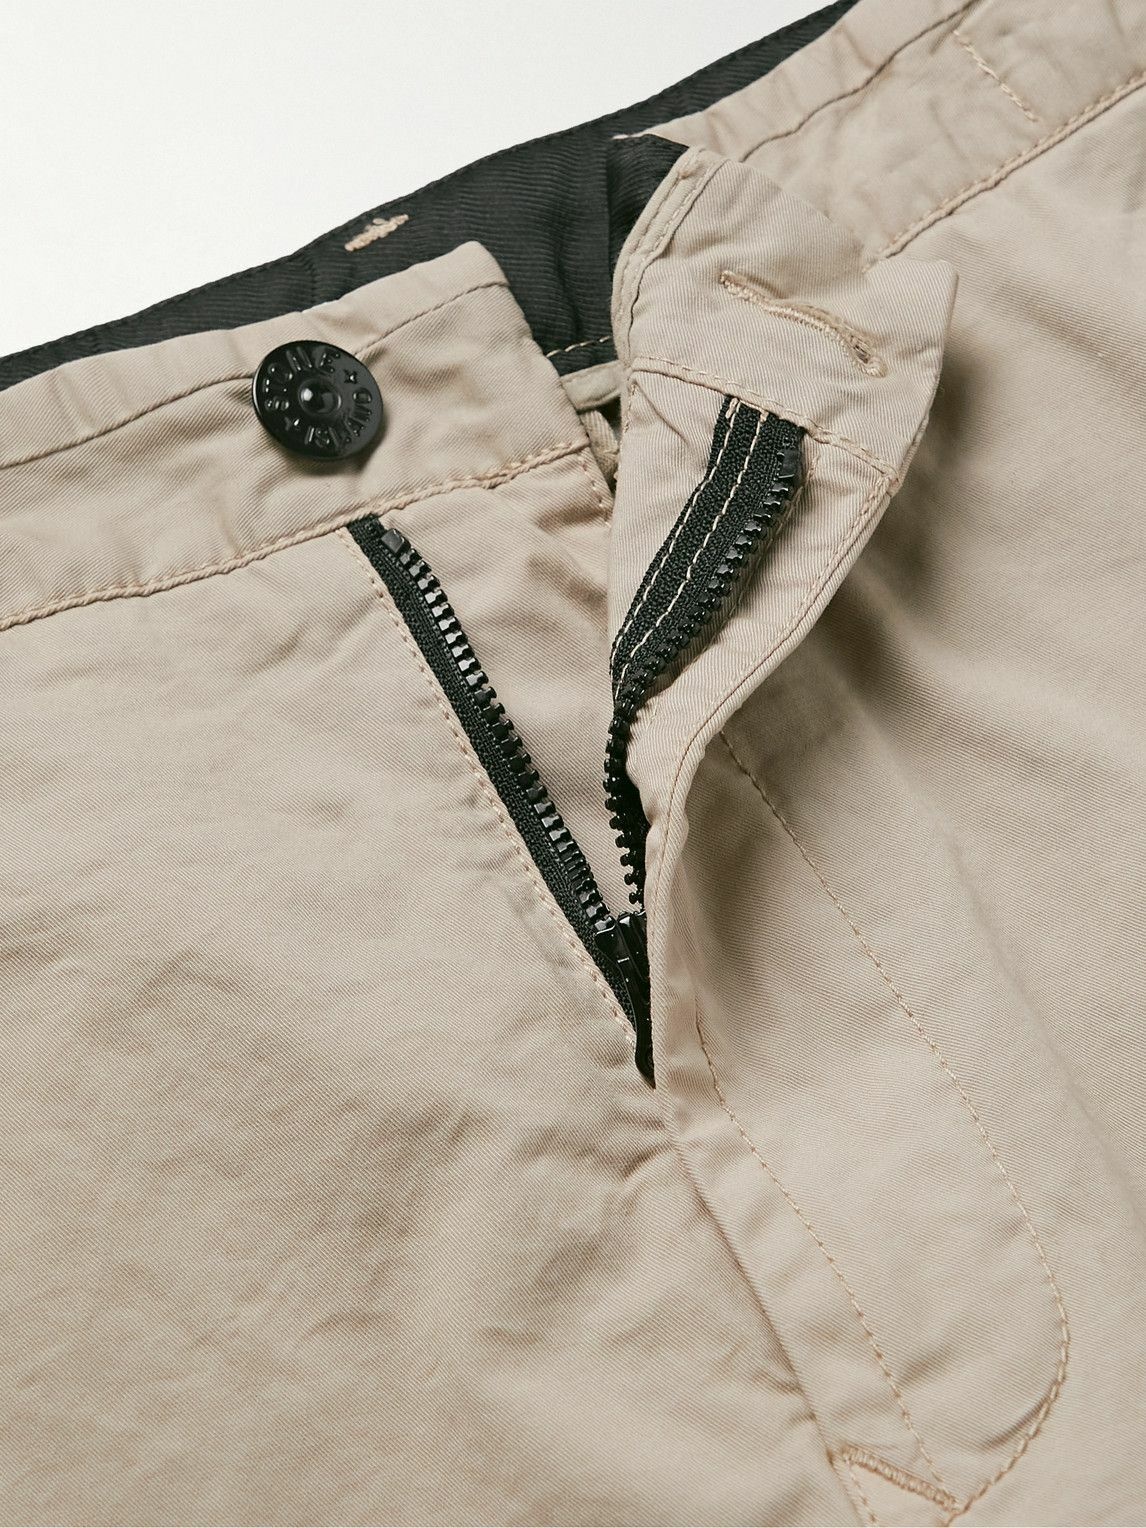 Stone Island - Slim-Fit Garment-Dyed Cotton-Blend Twill Cargo Trousers -  Green Stone Island